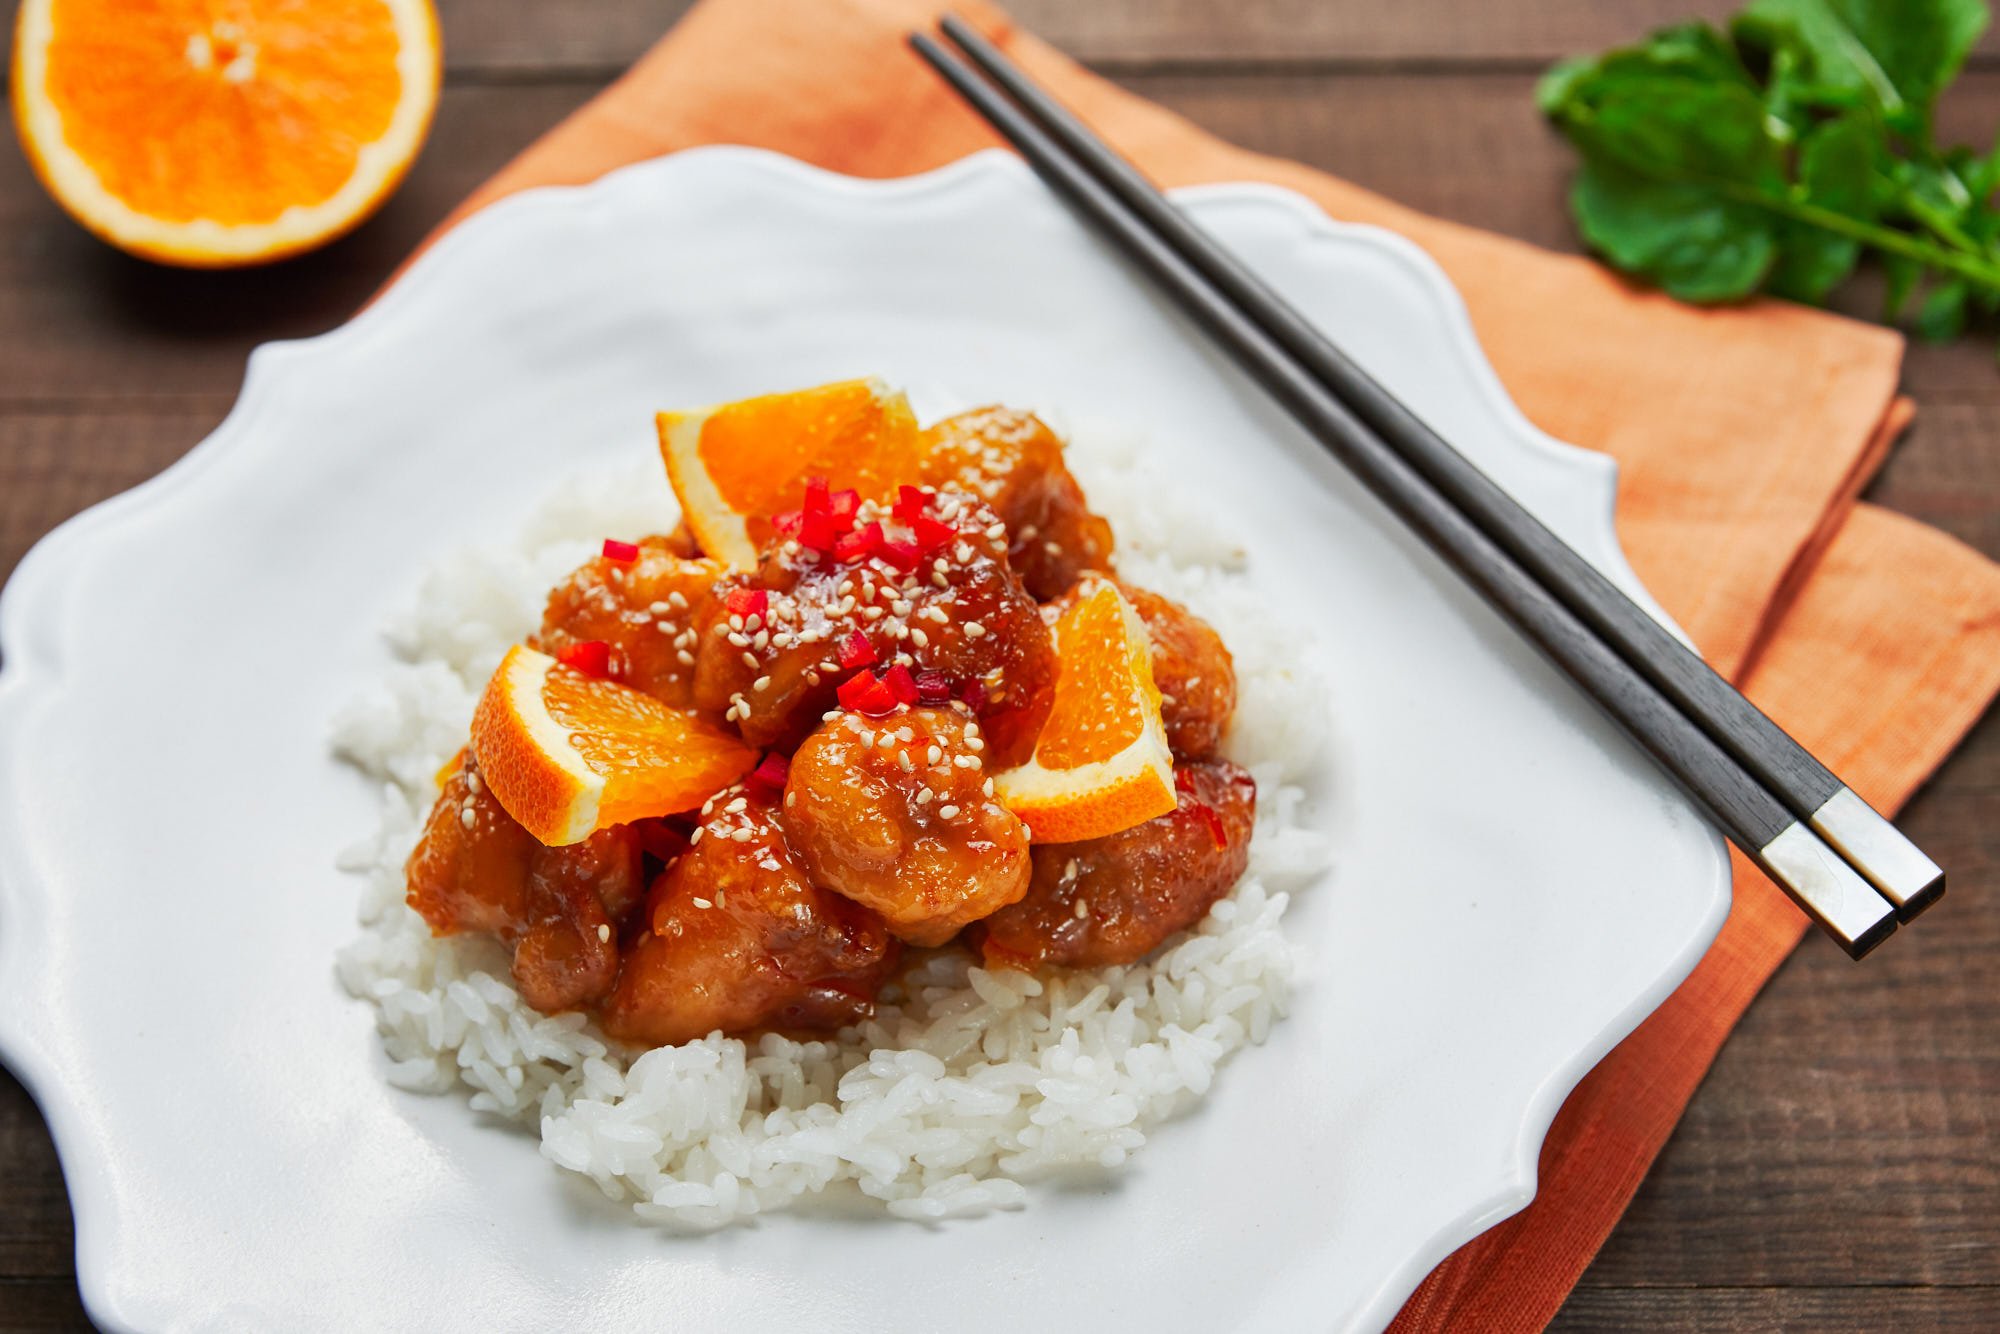 Orange chicken with orange segments served over a bed of white rice on a white plate with chopsticls.